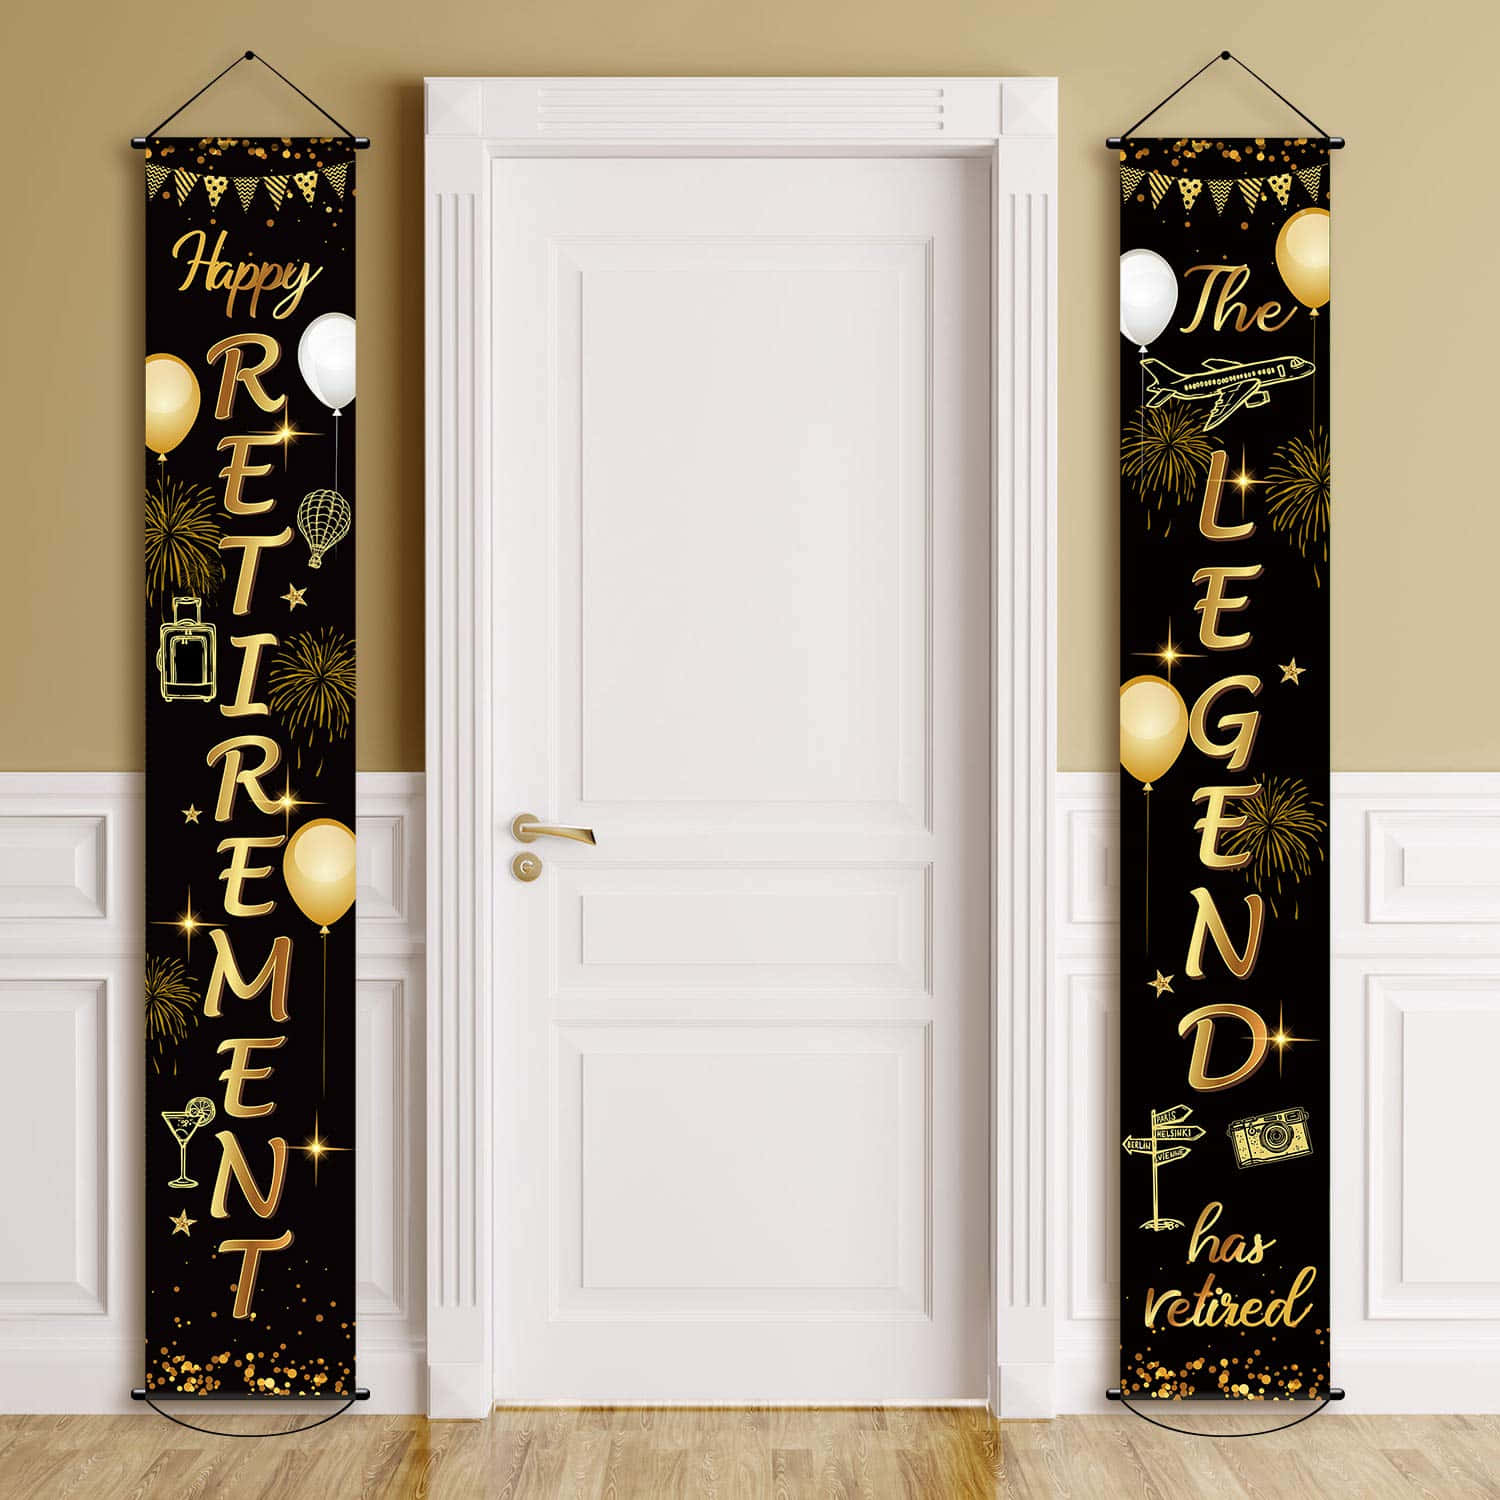 Retirement Banners - Gold And Black